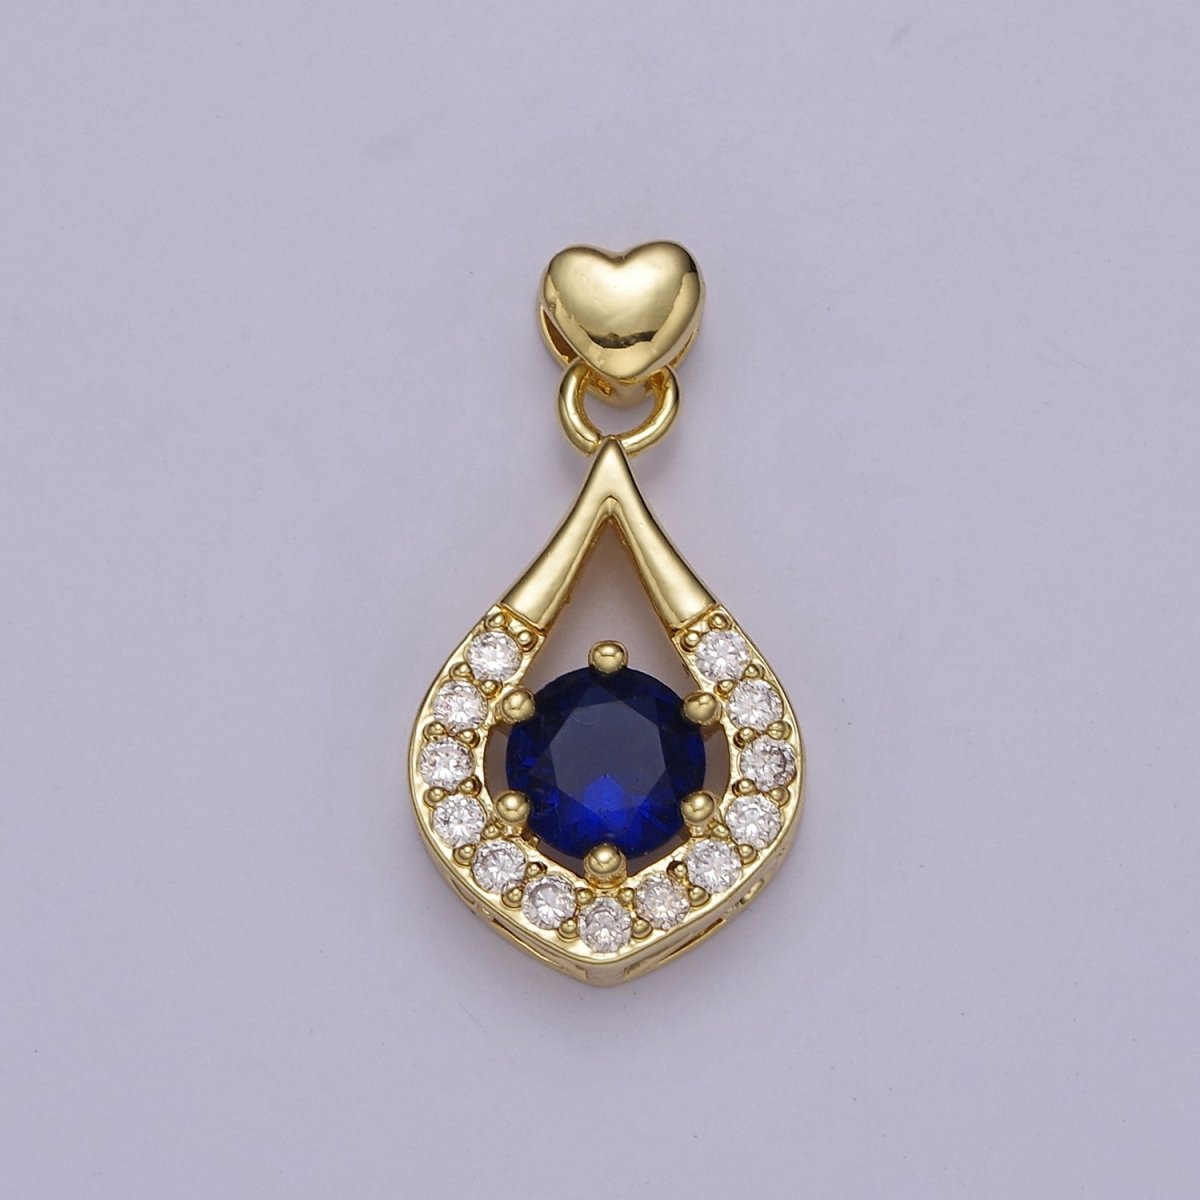 Multicolor Teardrop Cubic Zirconia CZ Stone Pendant Charm with Heart Golden Bail For Jewelry Necklace Making J-582~J-588 - DLUXCA